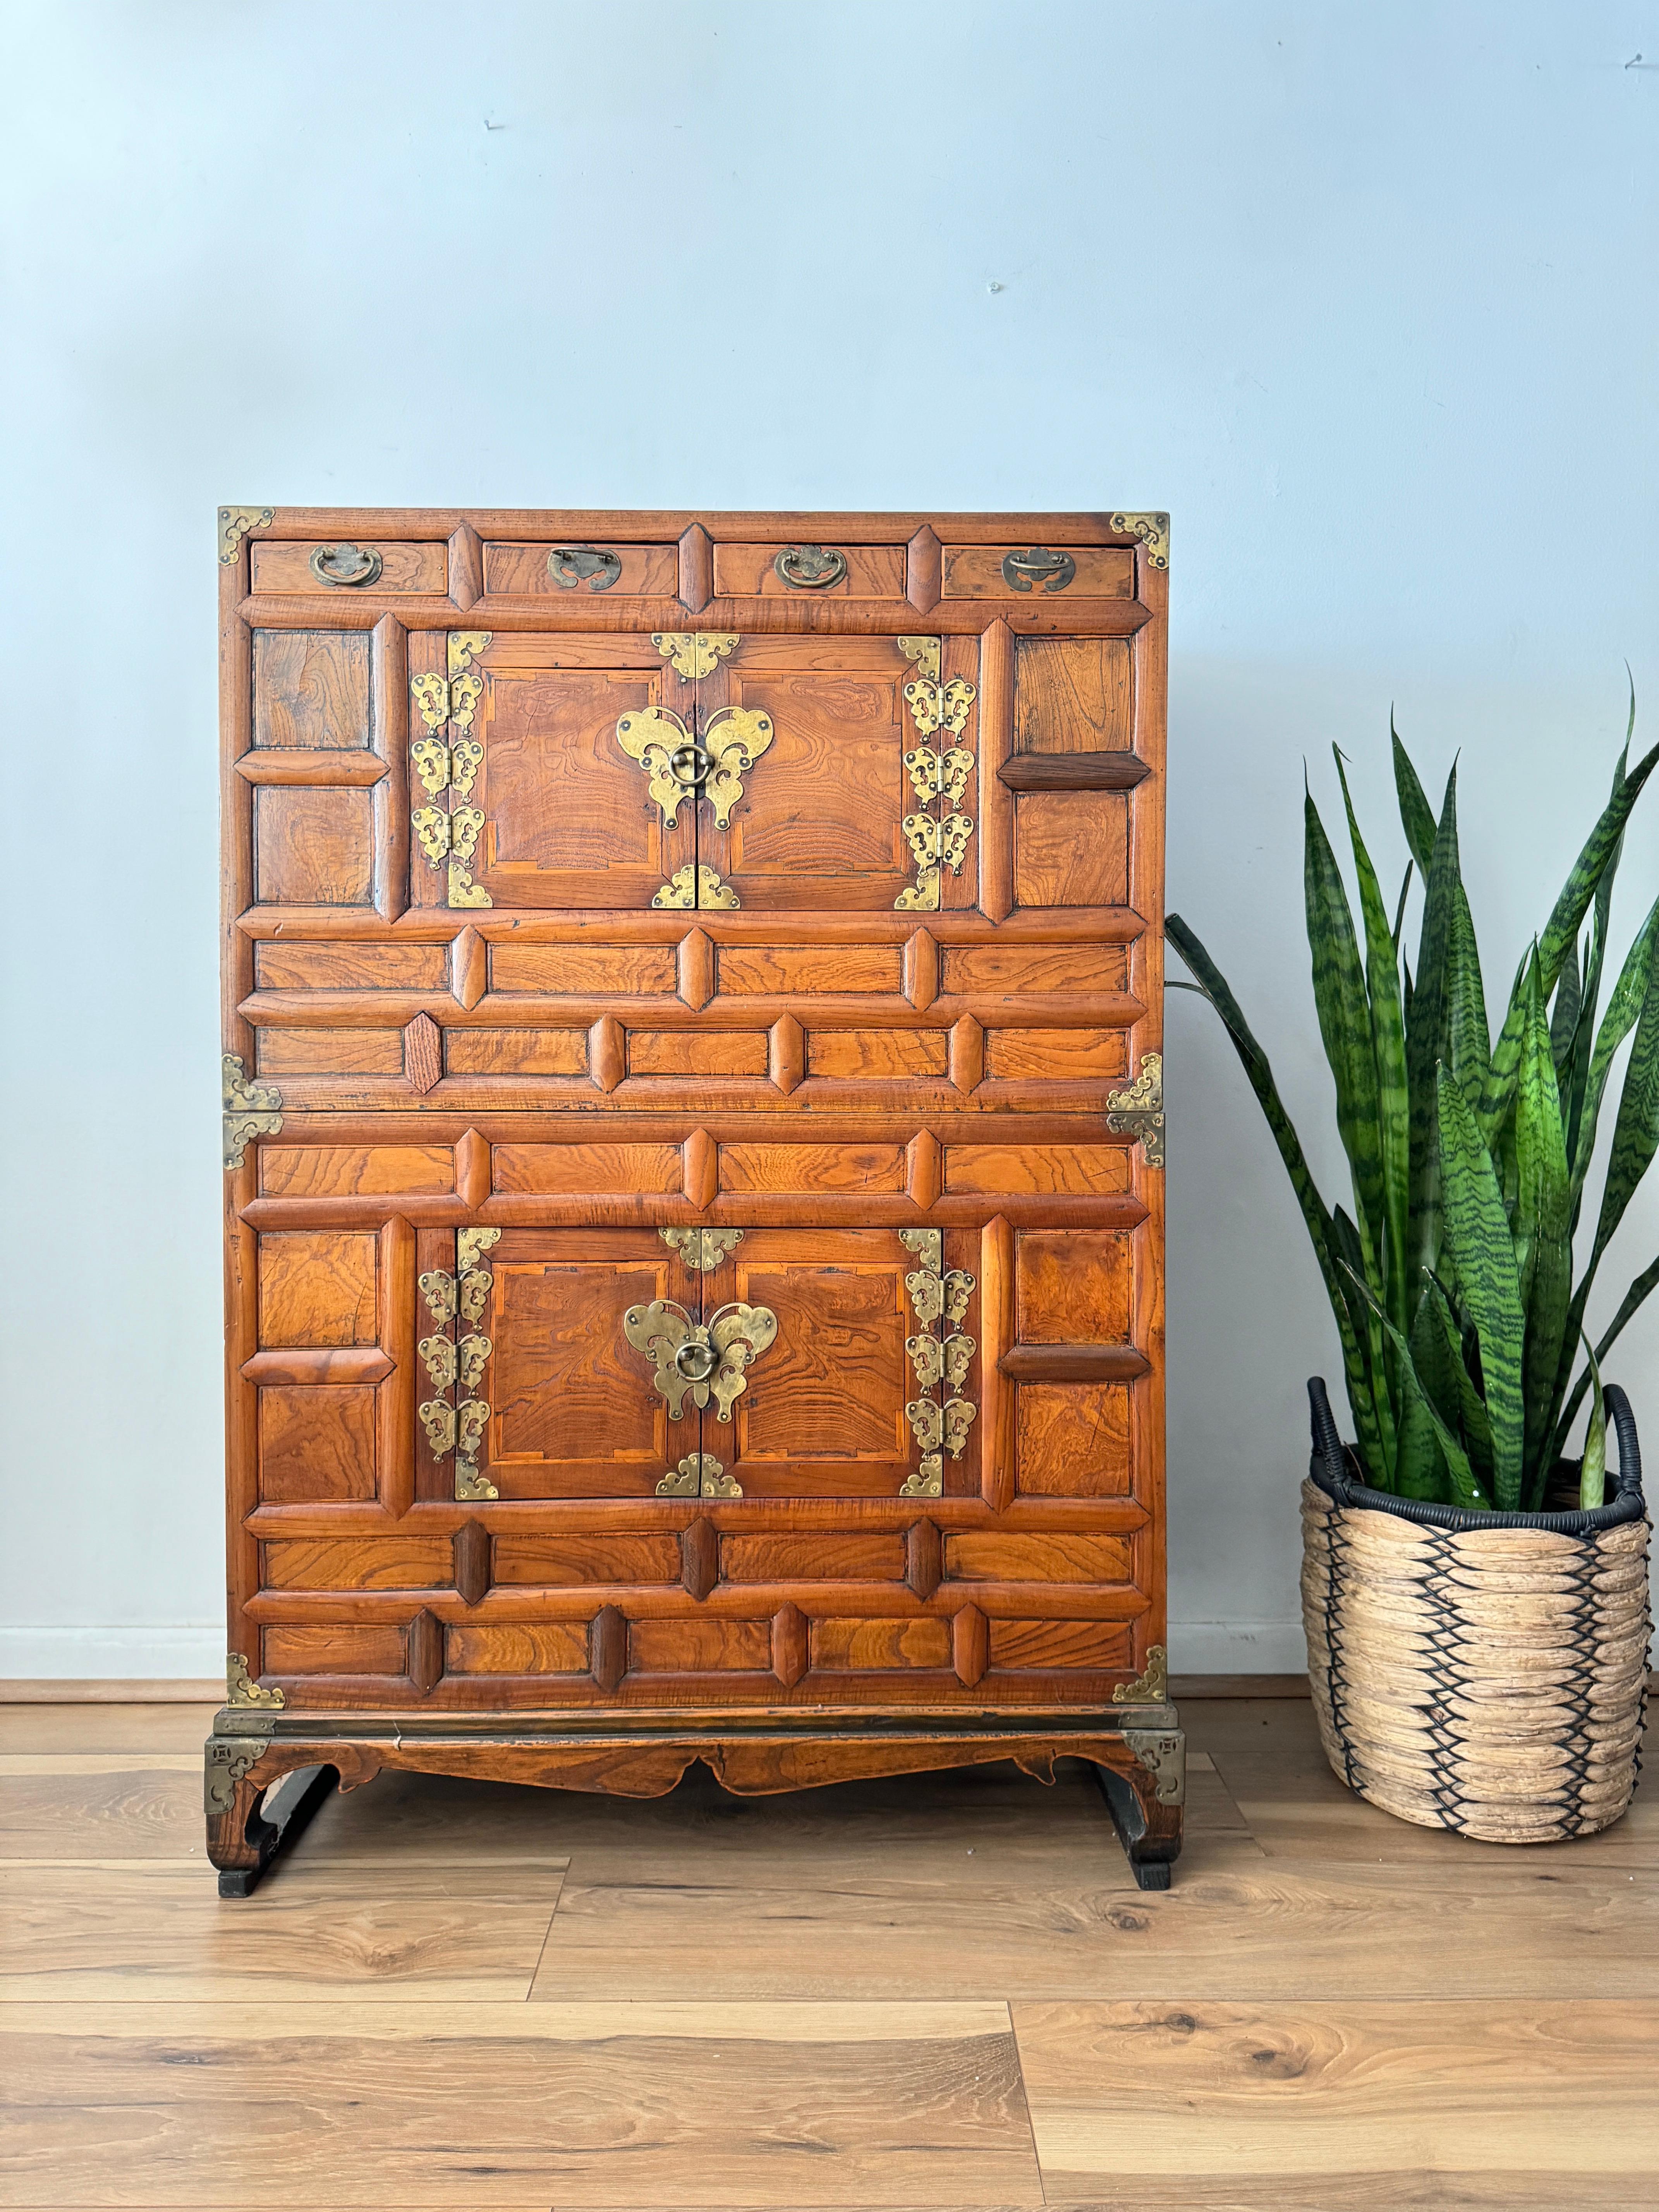 This is an exquisite two-part Korean Tansu cabinet from the early 20th century. The upper case features four small fitted drawers, while both upper and lower cases have central doors leading to storage compartments adorned with paper featuring